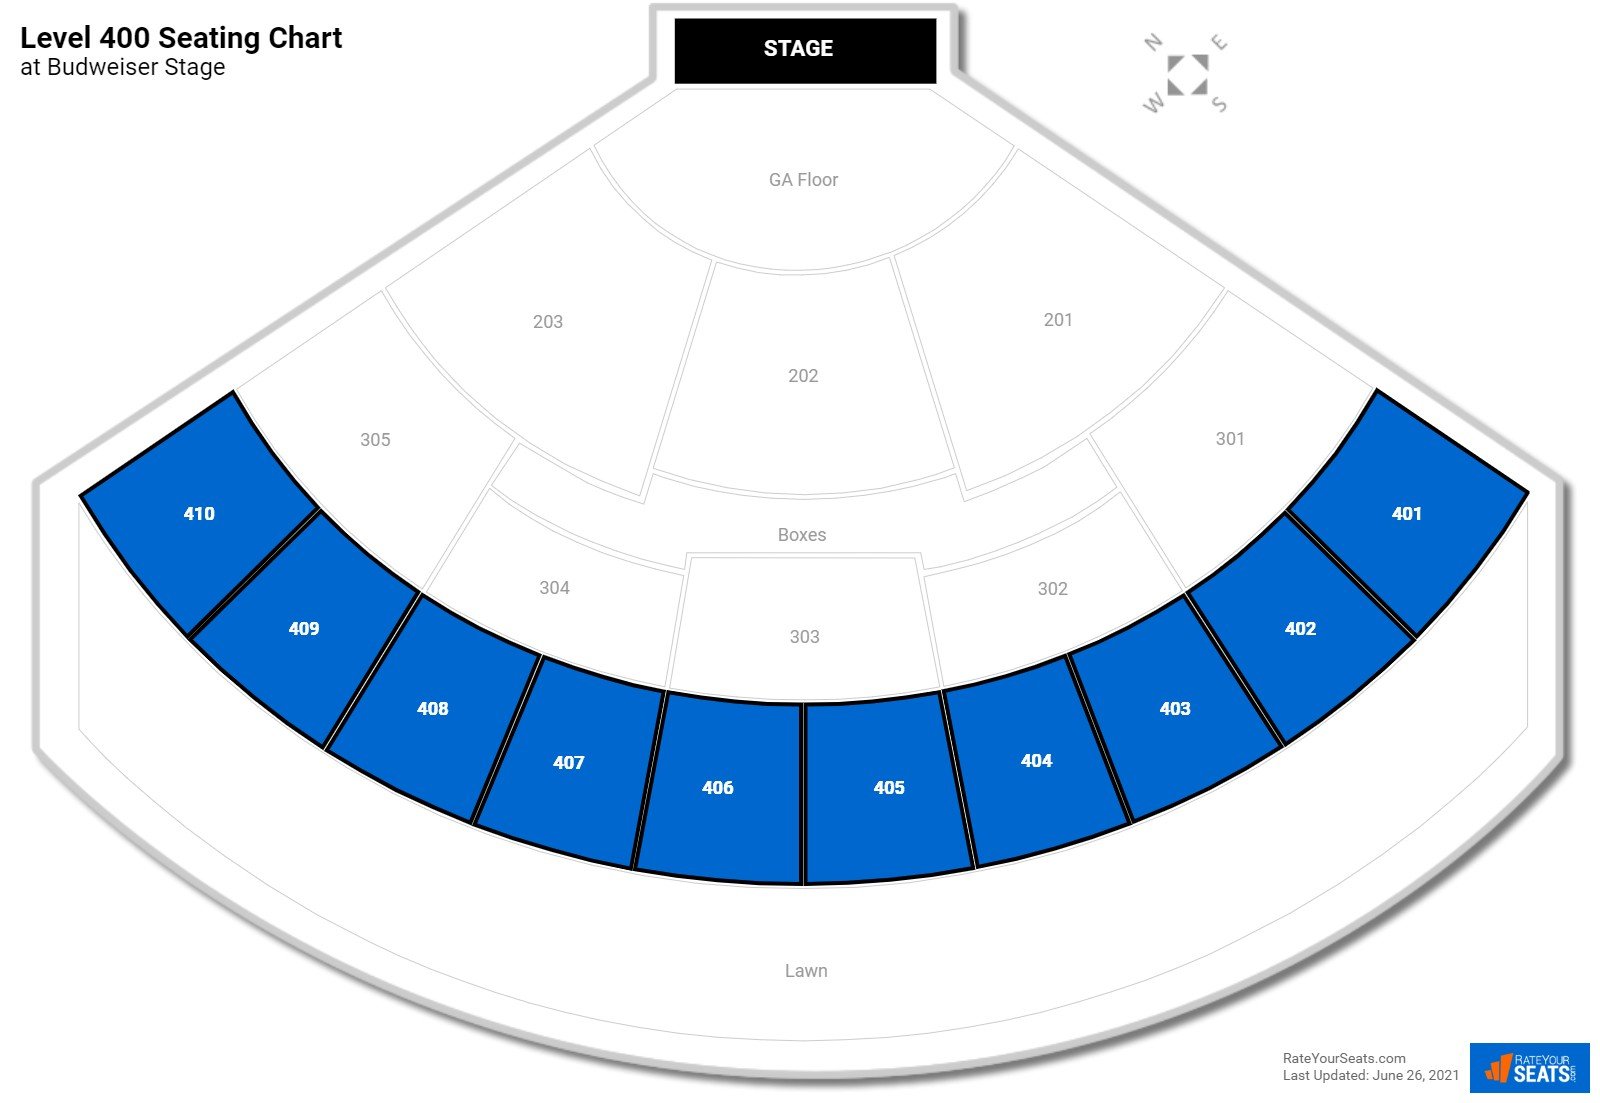 Budweiser Stage Seating Chart With Rows